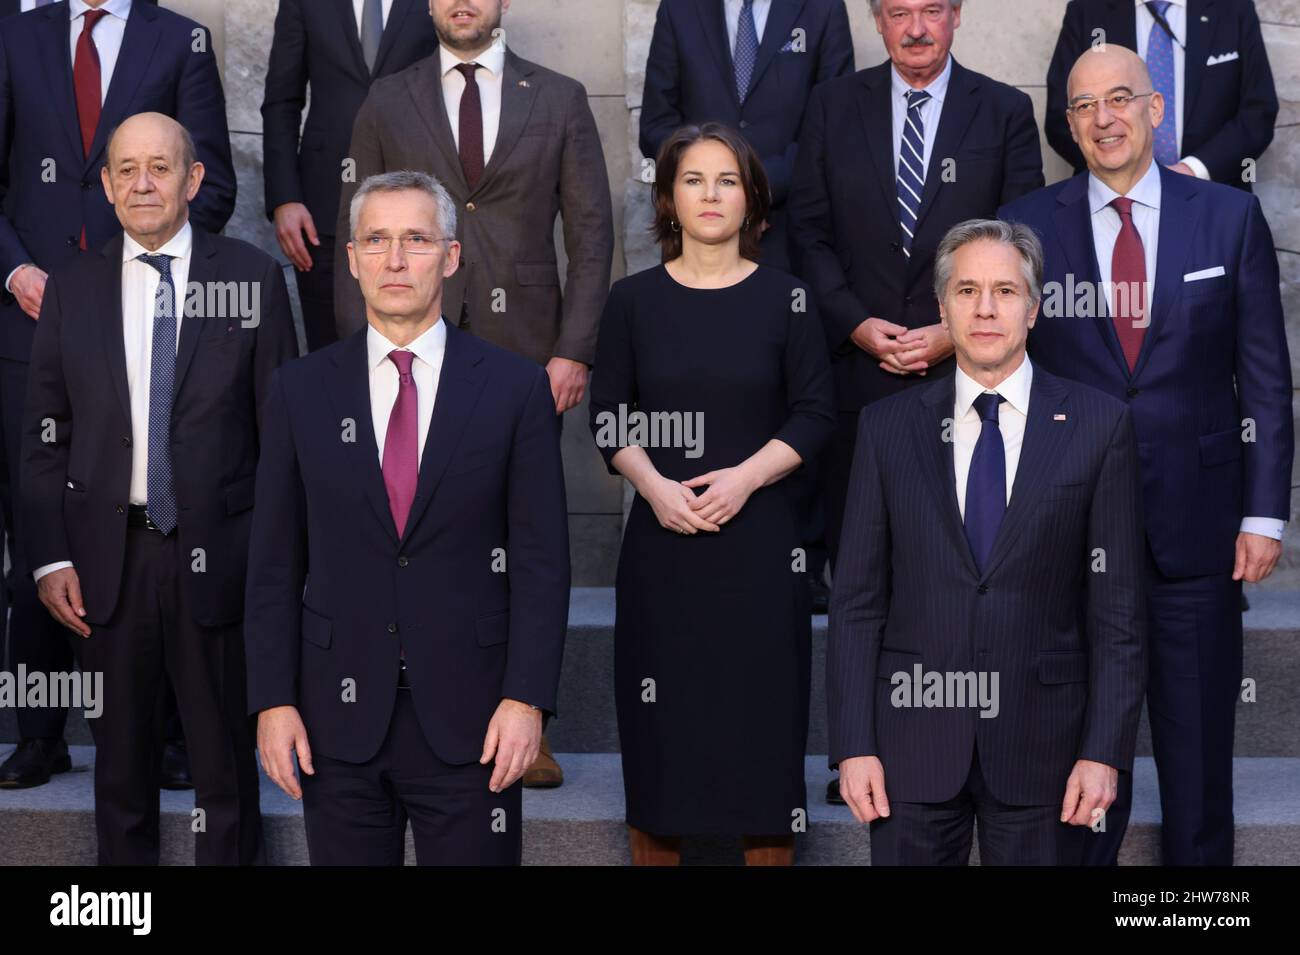 French European and Foreign Affairs Minister Jean-Yves Le Drian, NATO  Secretary General Jens Stoltenberg, German Foreign Minister Annalena  Baerbock, U.S. Secretary of State Antony Blinken and Greek Foreign Minister  Nikos Dendias attend